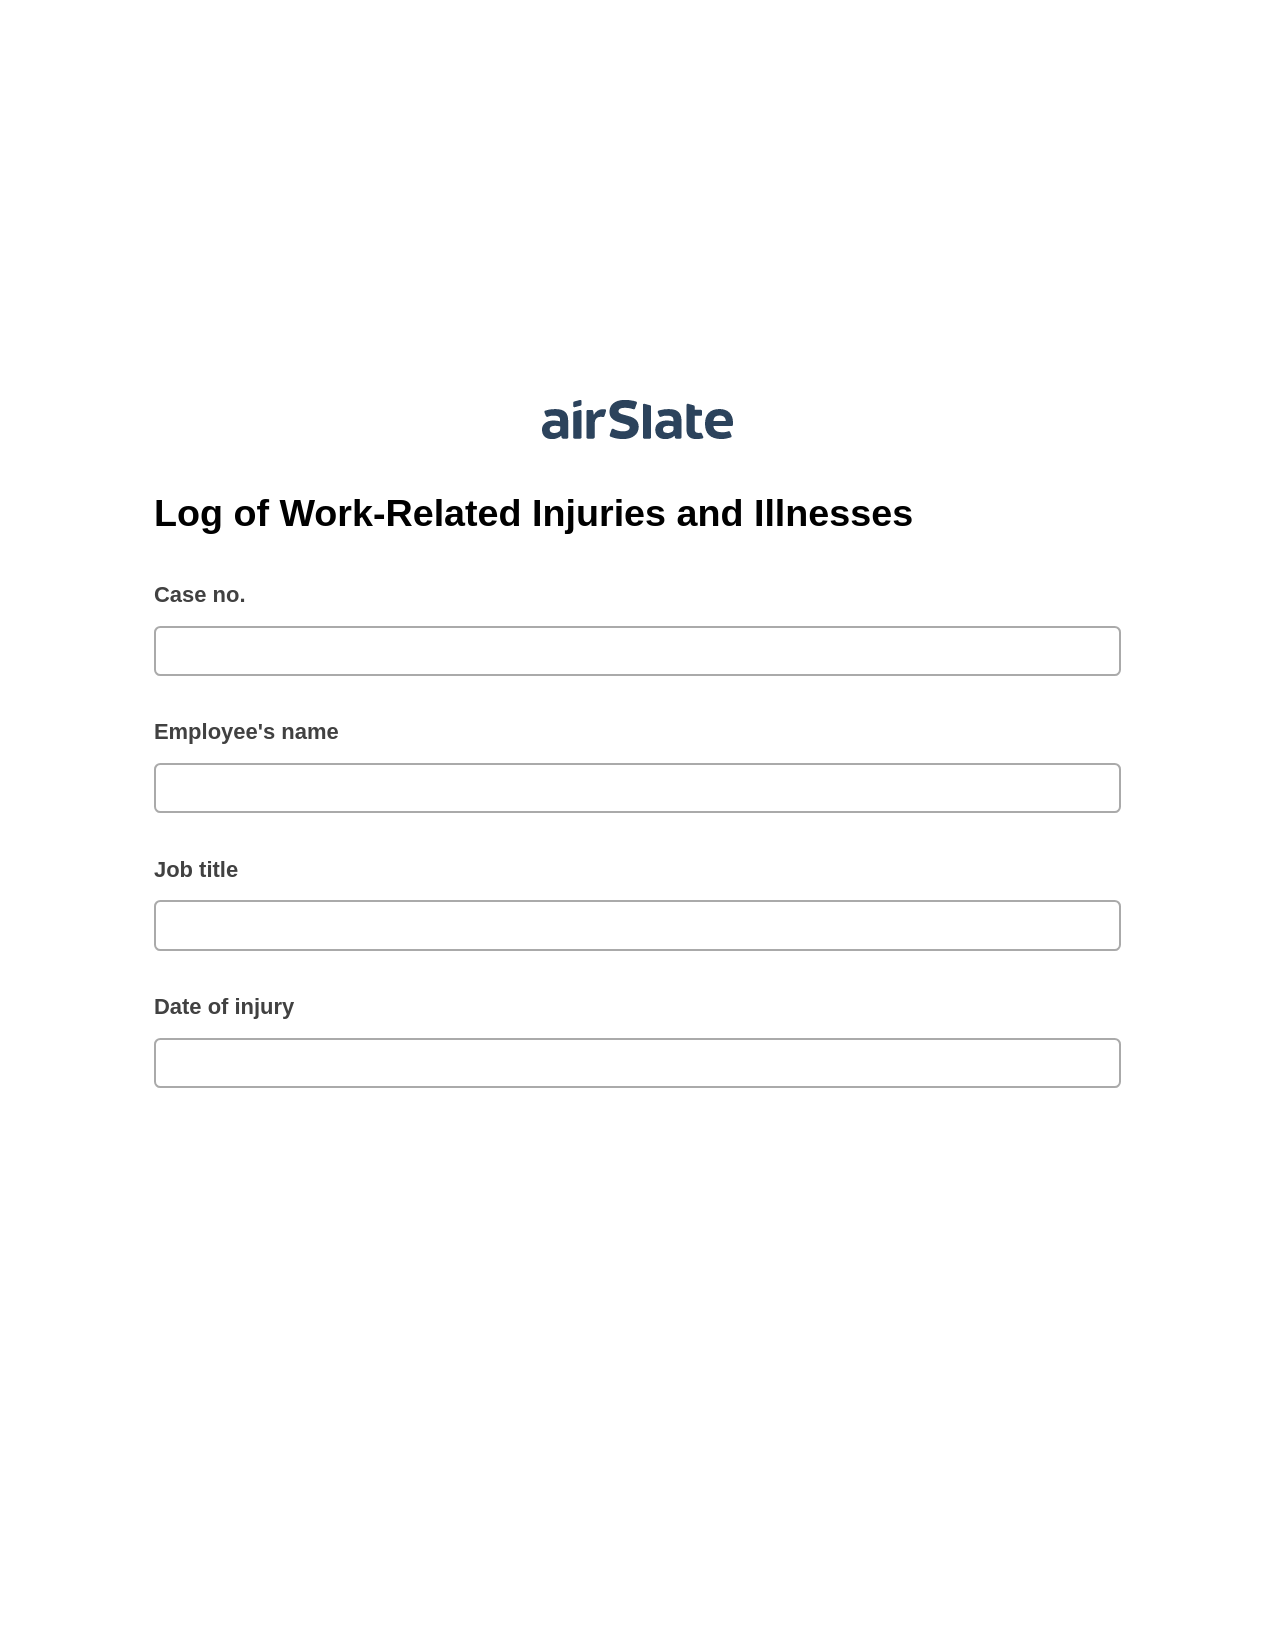 Multirole Log of Work-Related Injuries and Illnesses Pre-fill from NetSuite Records Bot, Create NetSuite Records Bot, Email Notification Postfinish Bot